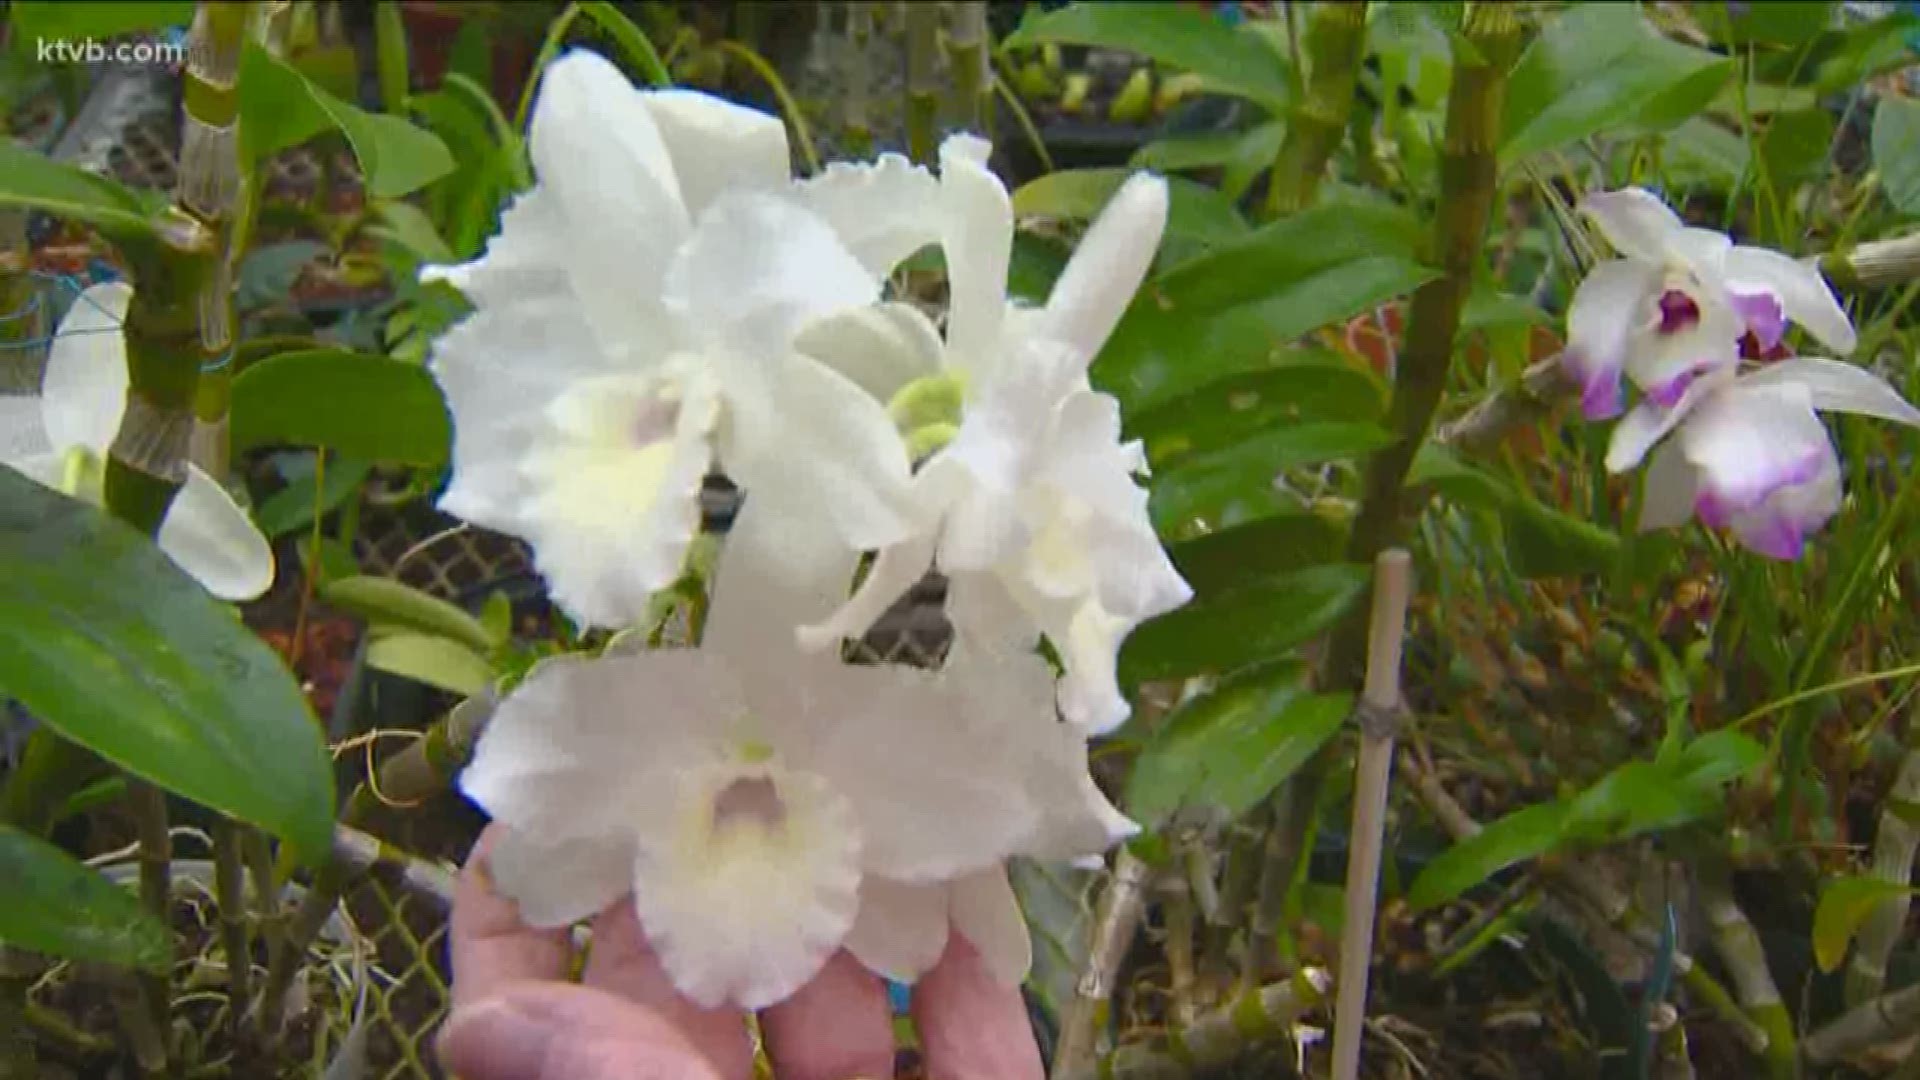 Jim Duthie takes us to a local greenhouse where Janet Crist grows all kinds of orchids.